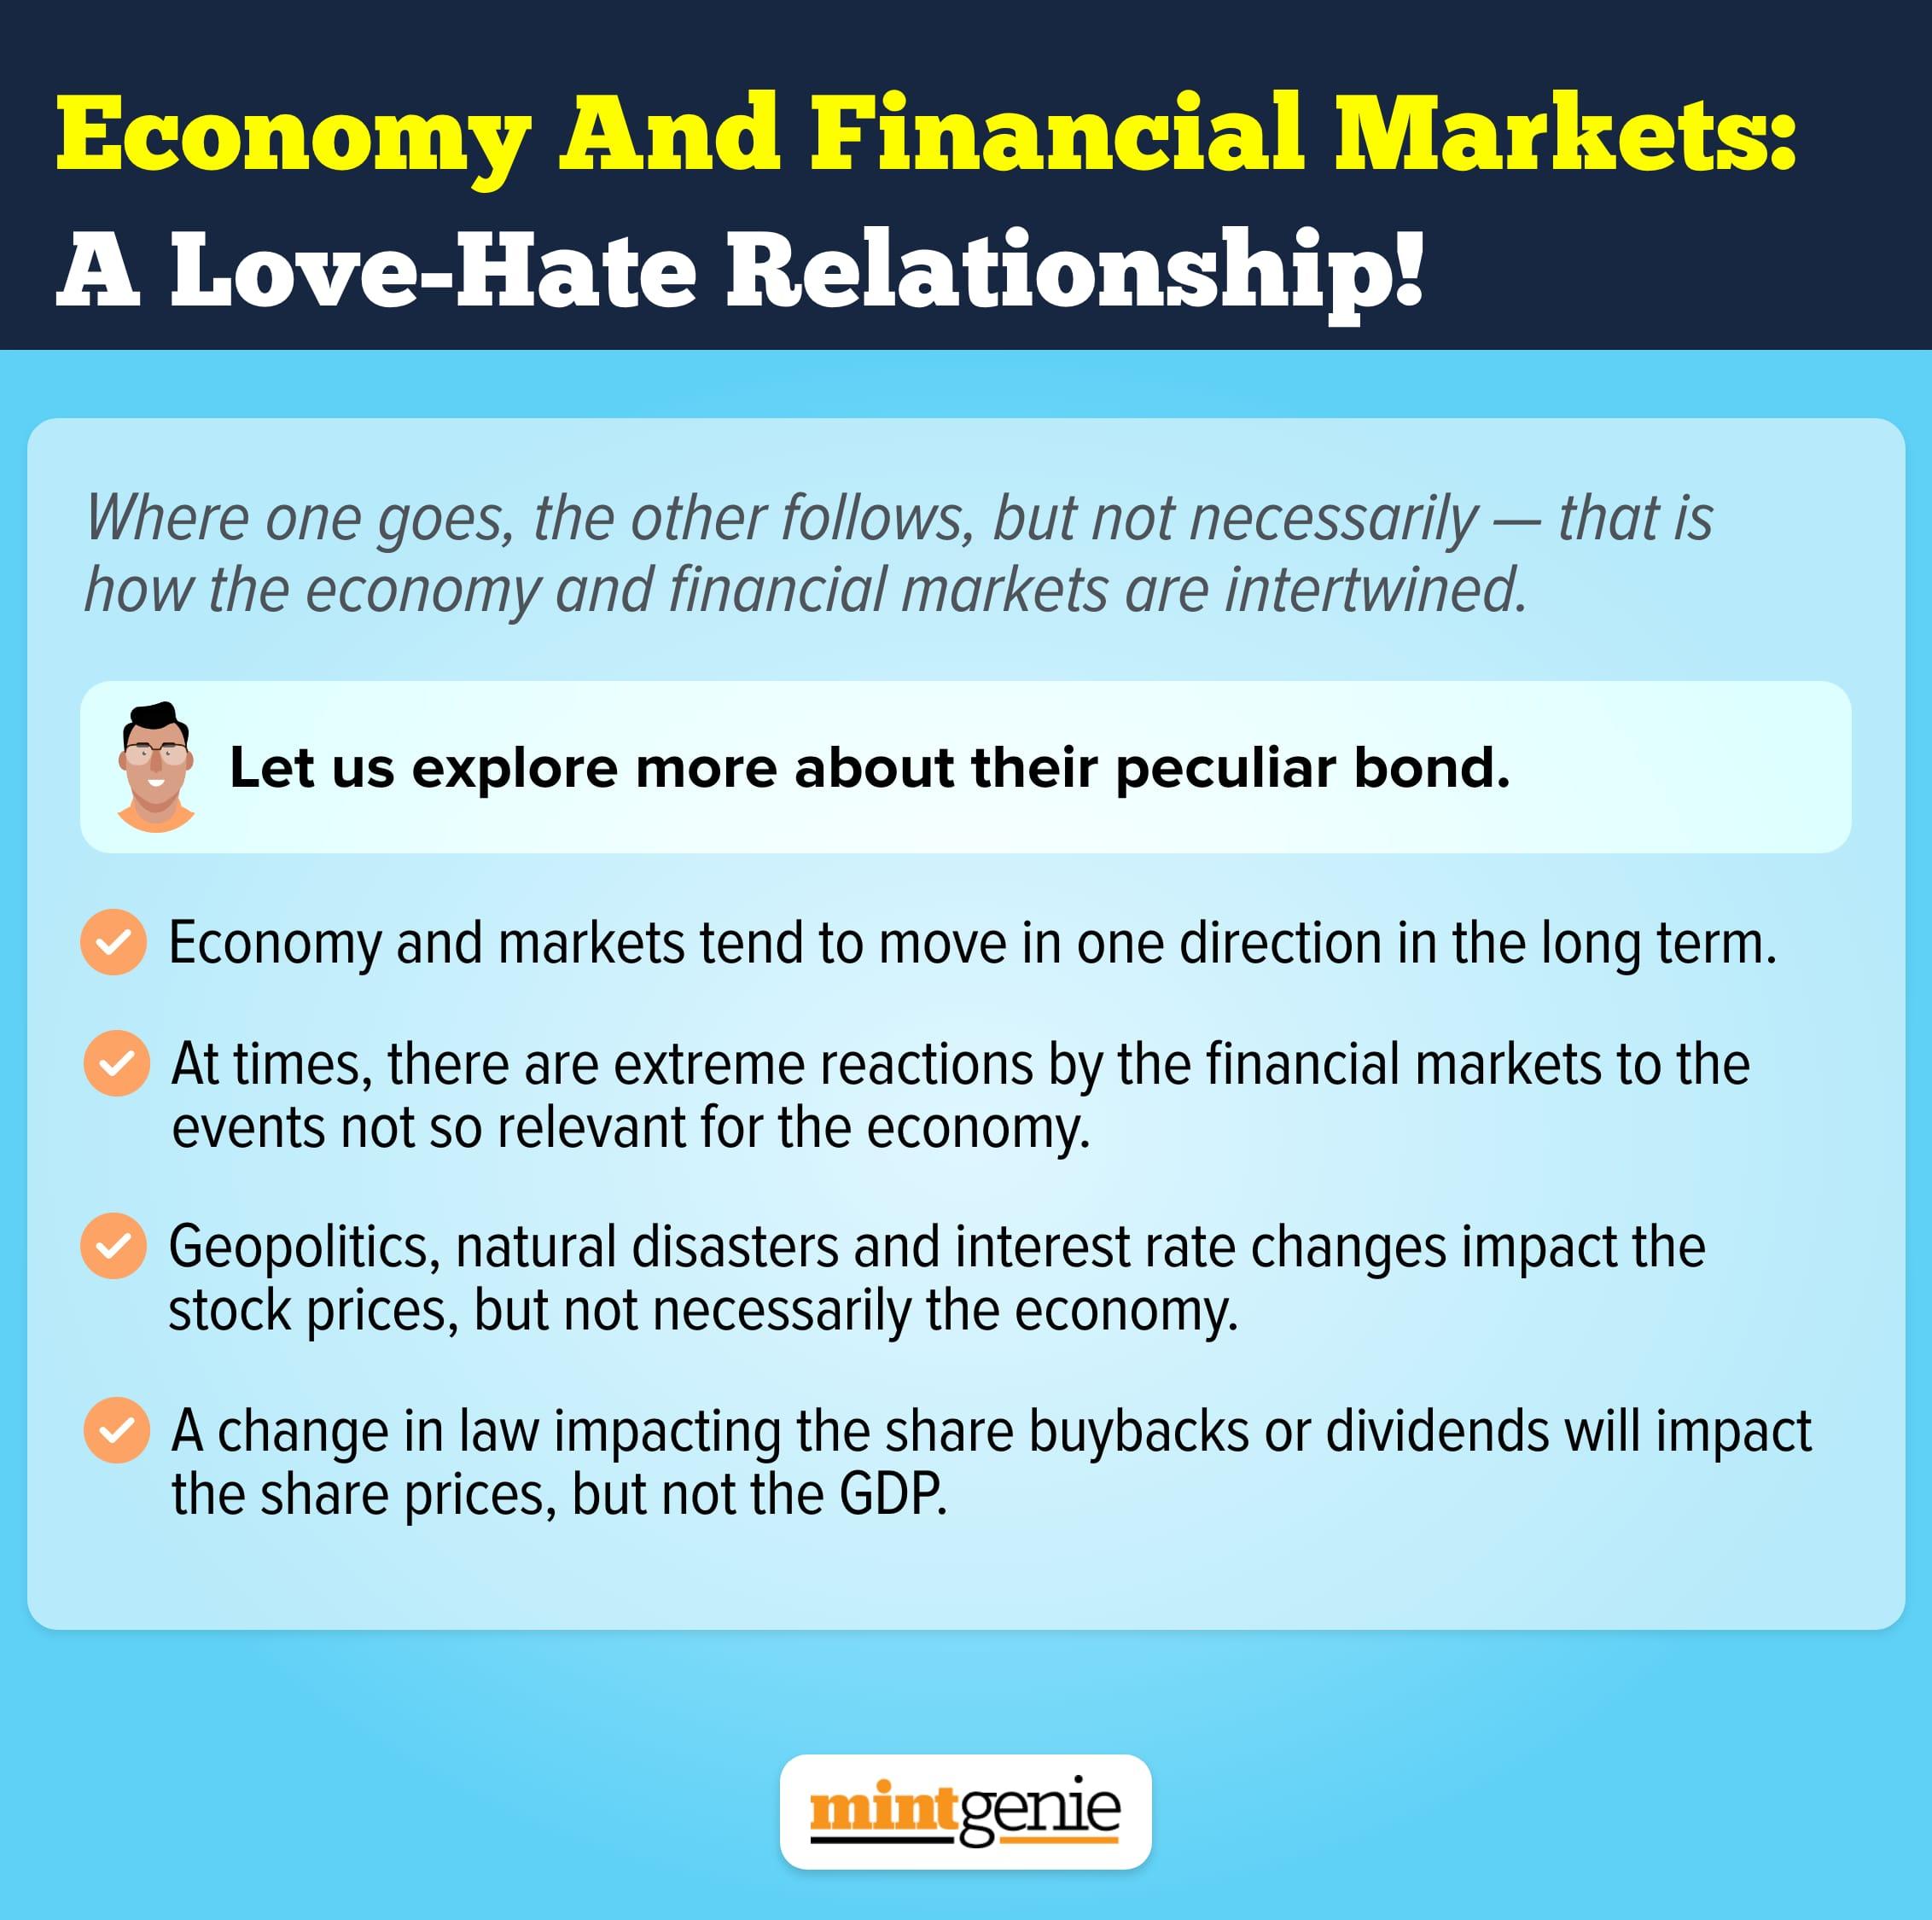 Economy and financial markets: A love-hate relationship